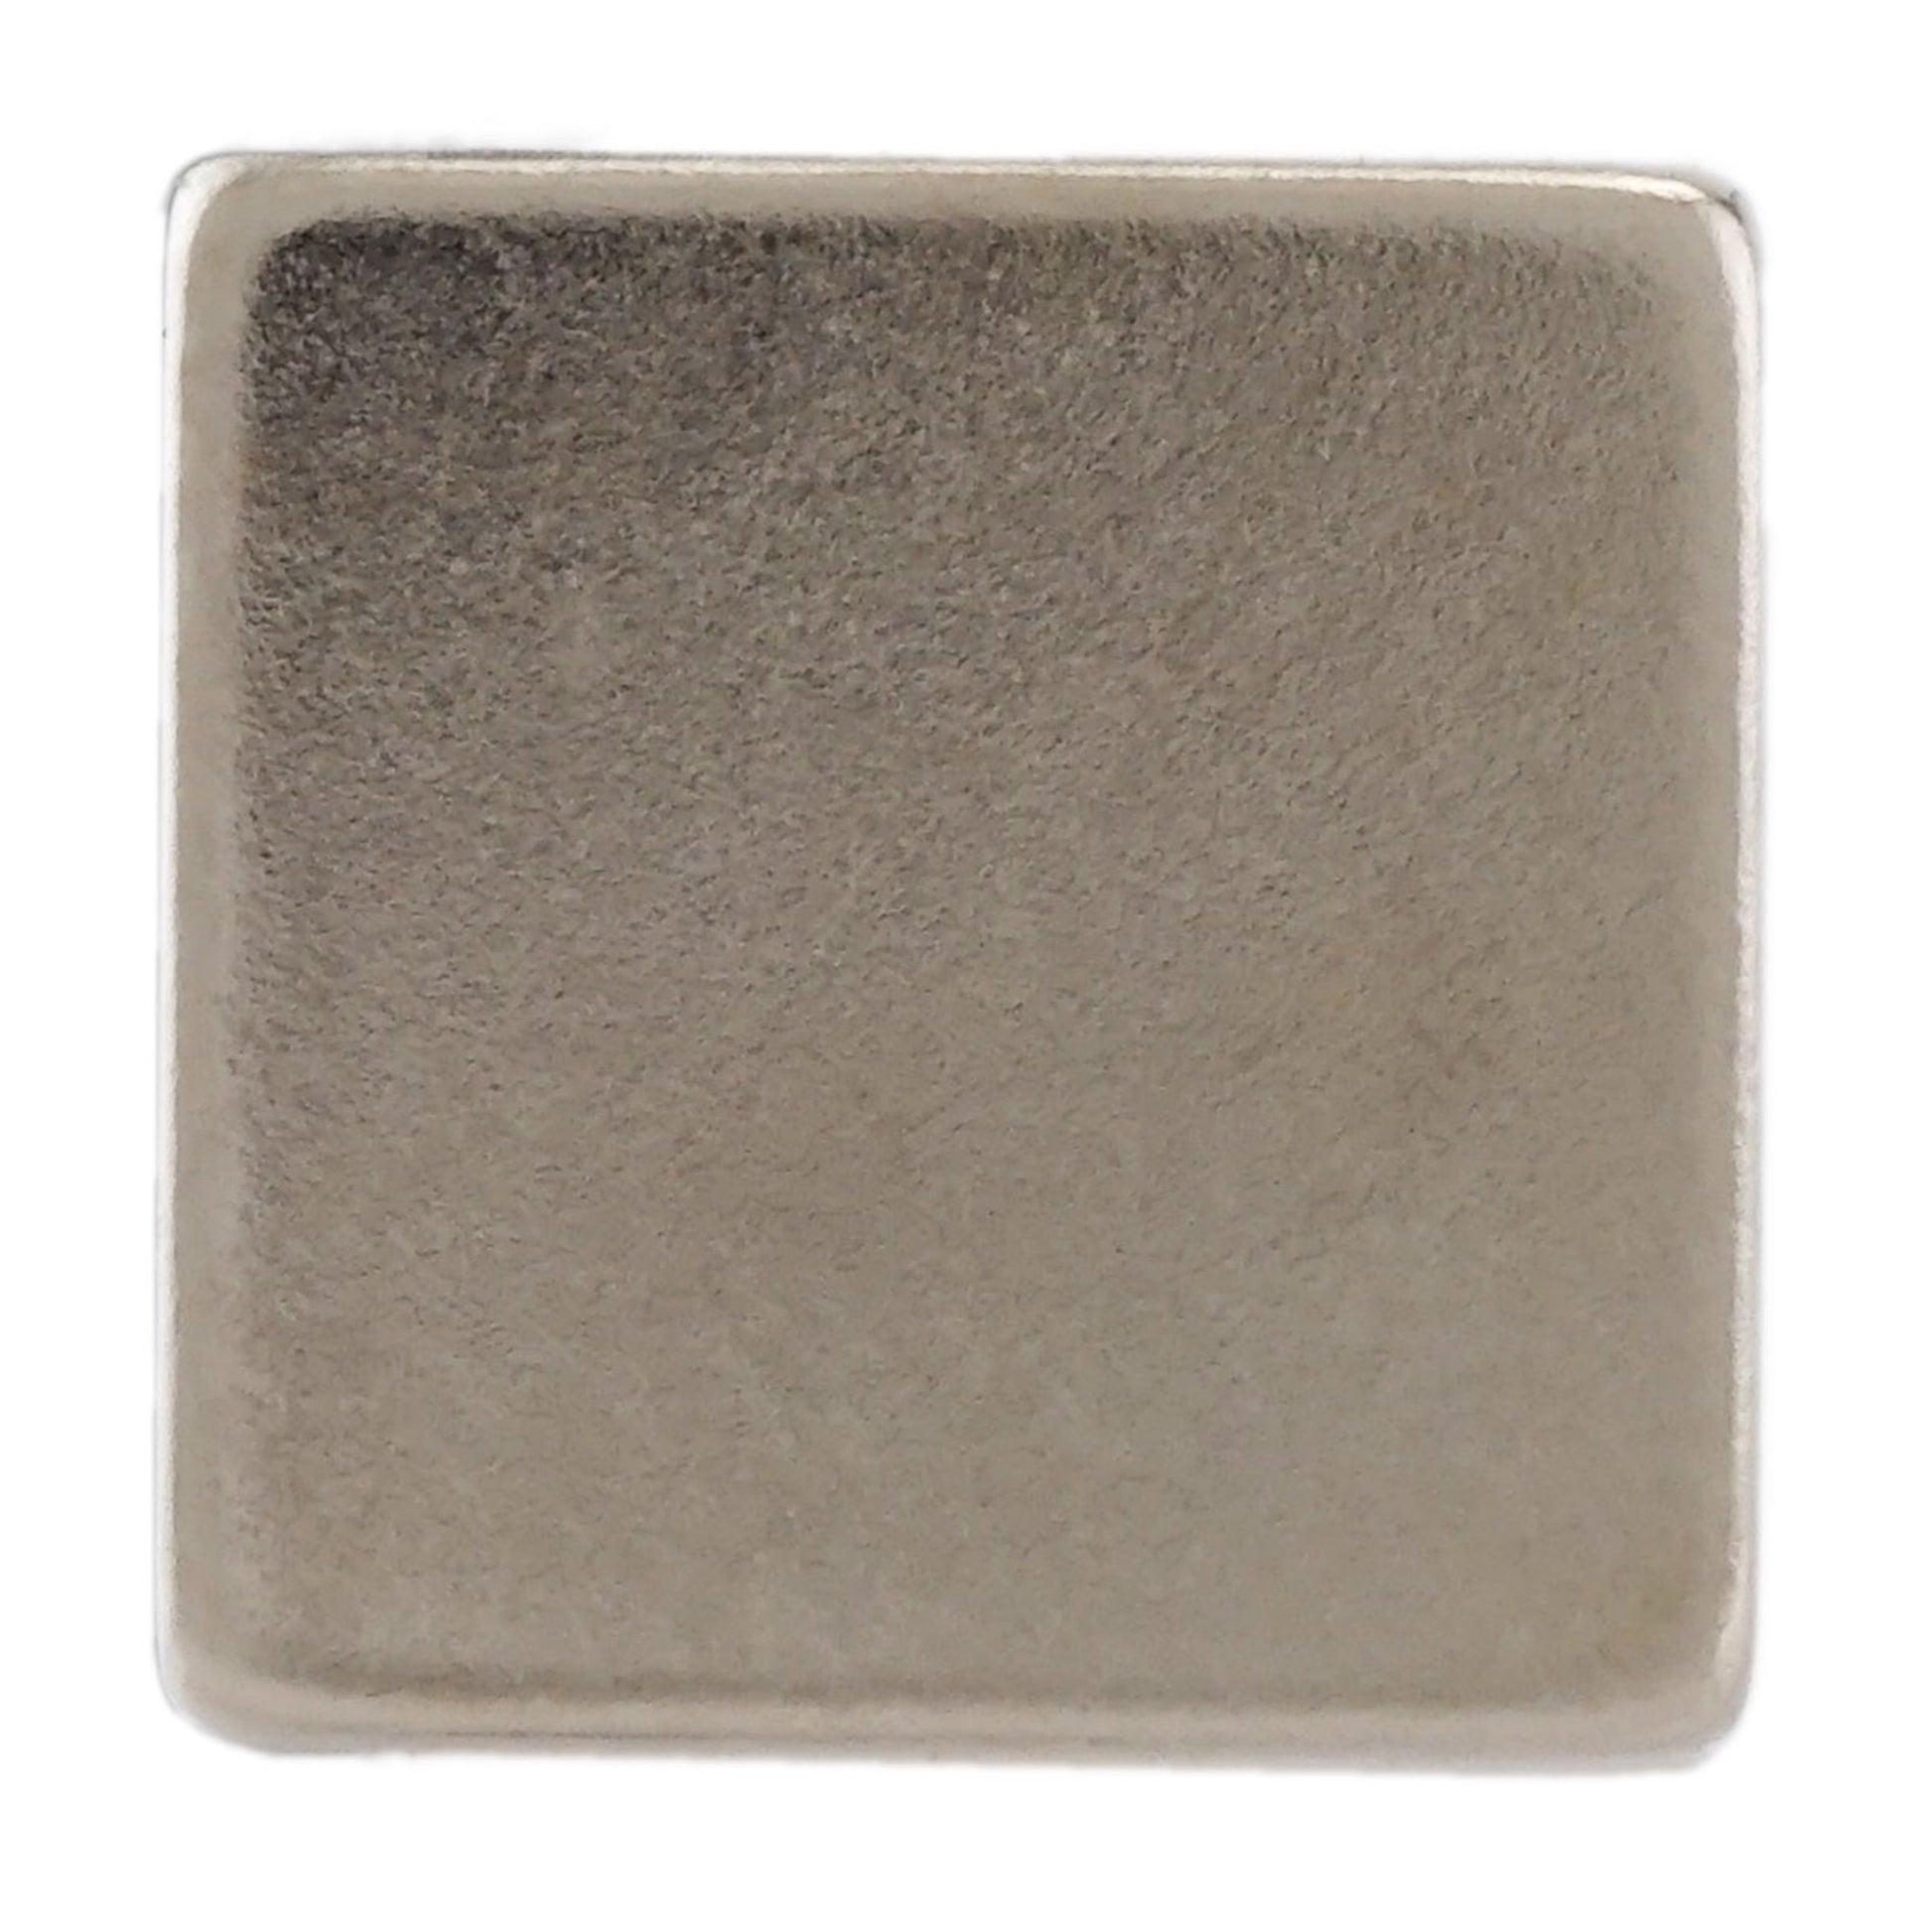 Load image into Gallery viewer, NB007502NS01 Neodymium Block Magnet with hole - Side View